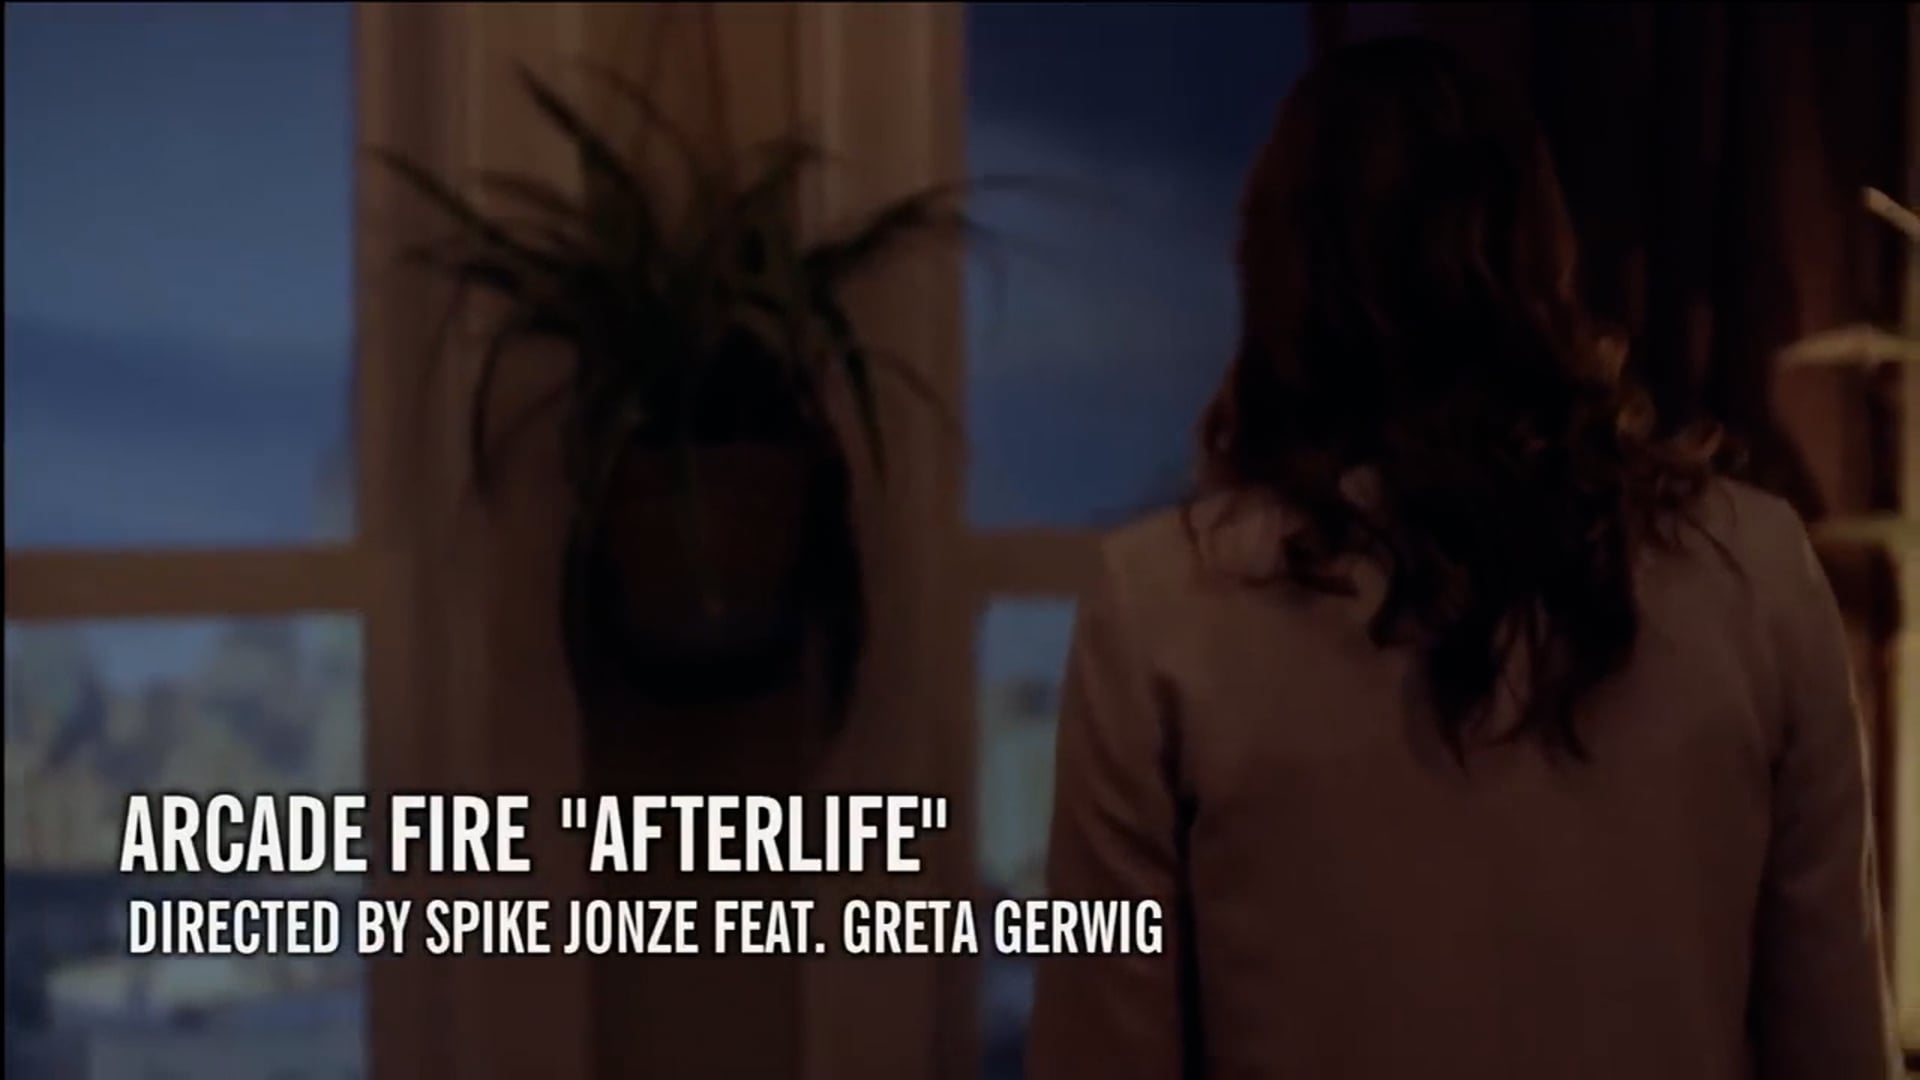 Arcade Fire "Afterlife"
Directed By Spike Jonze Feat. Greta Gerwig